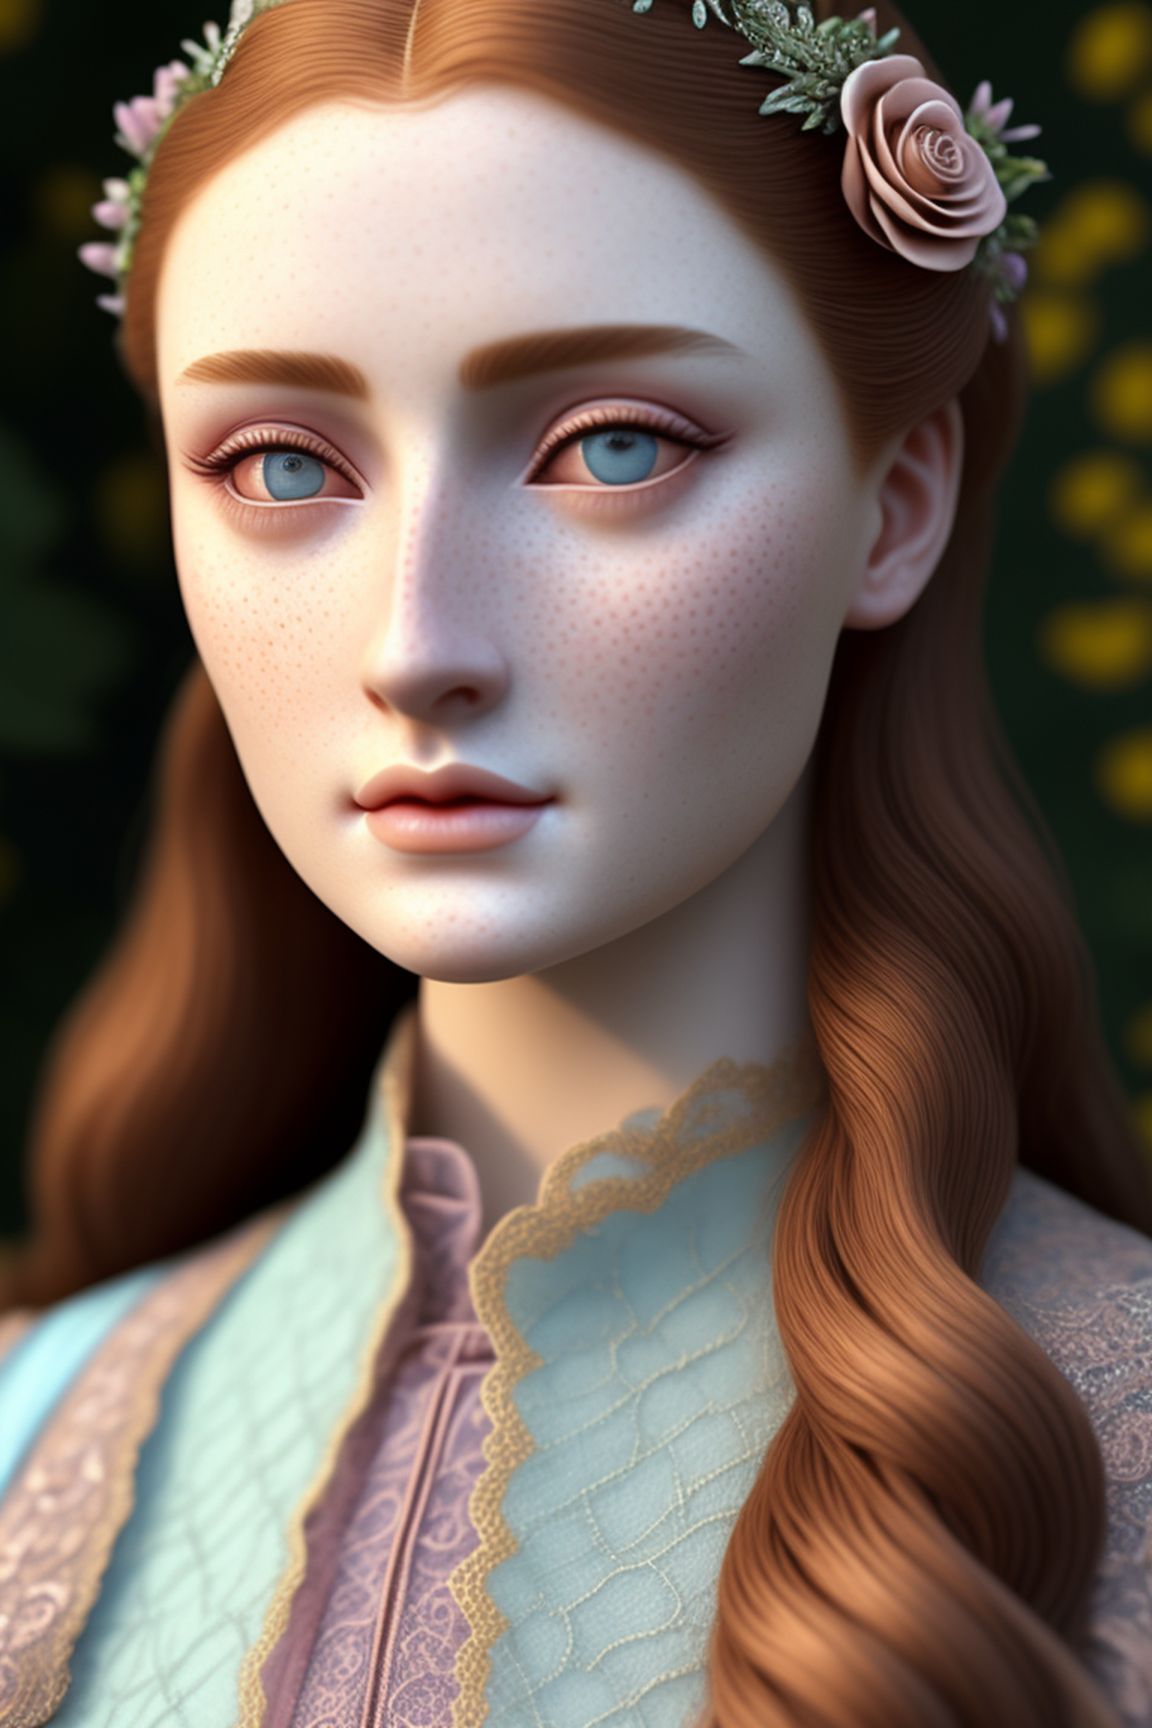 Sansa Stark, looks like Sansa Stark, face reference Sansa Stark, resembles Sansa Stark, Game of Thrones Sansa Stark, delicate beauty, doe eyes, rosebud lips, very realistic, pale skin with rosy cheeks and freckles over nose, pre-raphaelite art style, hyperrealistic details, sea blue eyes, pale skin with rosy cheeks, long auburn hair that shines like copper, round face and doll like feminine features, symmetrical irises, symmetrical pupils, symmetrical scleras, no extra arms, no extra legs, feminine frame, feminine clothing, lavender color scheme in clothing, robin egg blue color scheme in clothing, silk texture in clothing, spring colors, spring landscape, floral landscape, sandro botticelli inspired, italian renaissance inspired, sweet and somber facial expression, slight smile on lips, very elaborate details in both forefront and background, soft lighting, no stretching face, no stretching neck, no stretching torso, flower wreath in hair, halo effect, small cute ears, slightly tilted head, richly soft color palette in clothing, realistic skin details like freckles and pores, dainty and lady like, very winsome and romantic, rich faunlike beauty, fairytale princess beauty. , golden lighting, regal attire, Epic, Highly detailed, Digital painting, Artstation, Concept art, Sharp focus, art by magali villeneuve and rk post and greg rutkowski, Intricate, fantasy., Sansa stark, doe eyes, Round face, Rosebud lips, Auburn red hair , Pale skin, Very pale skin, Lavender dress, Robin blue dress, Painted in the style of sandro botticelli, Portrait painted in the style of john william waterhouse, Angelic , Doll like face, Soft blue eyes, Serene facial expression, Art by Dante Gabriel Rossetti, In the style of art by roberto ferri